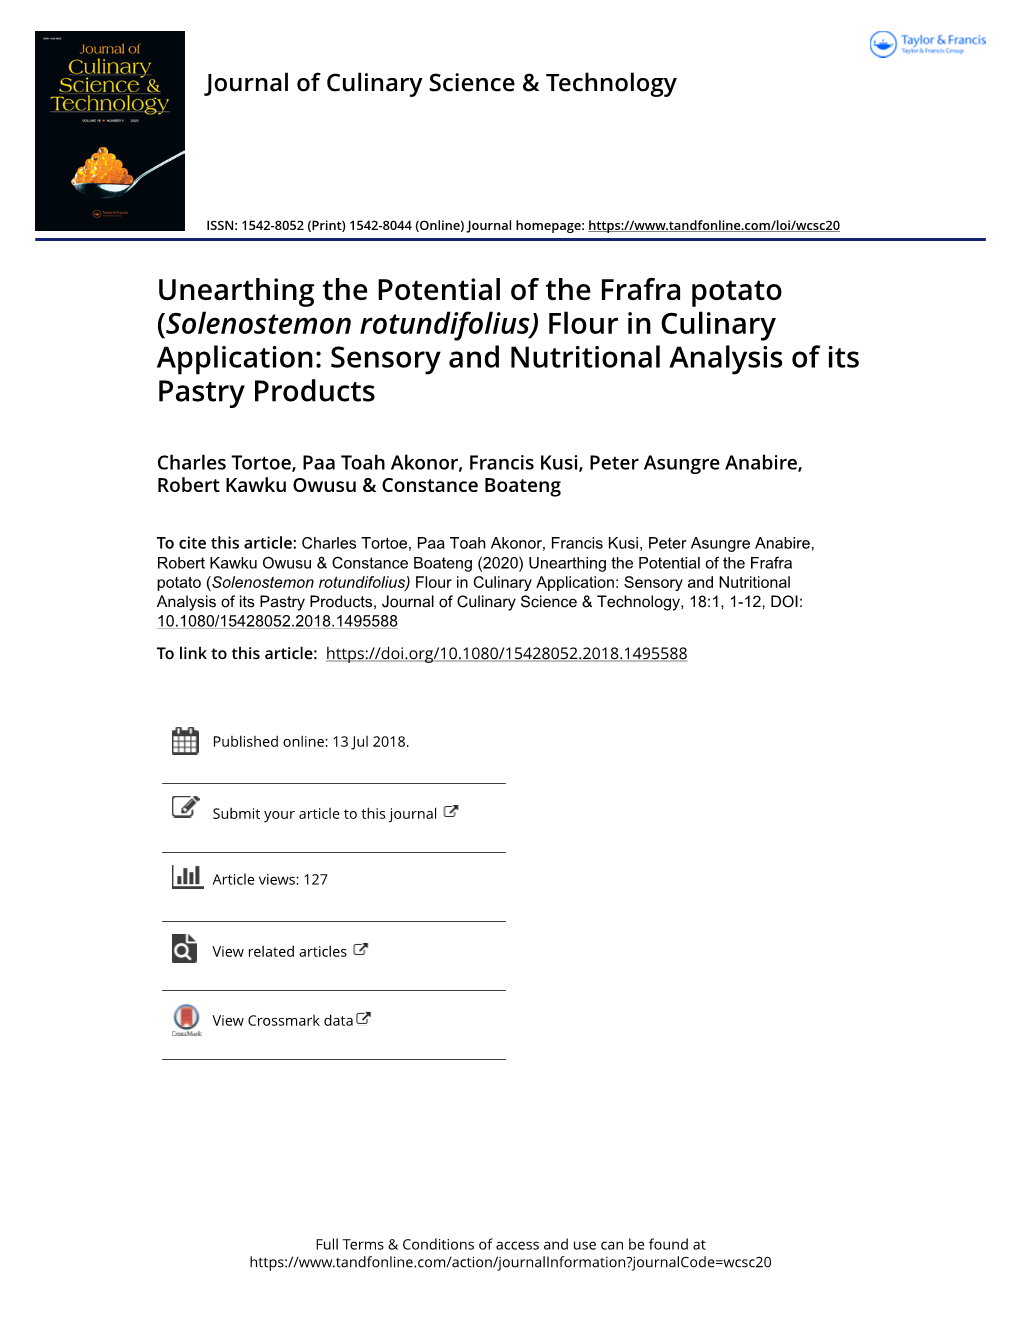 Unearthing the Potential of the Frafra Potato (Solenostemon Rotundifolius) Flour in Culinary Application: Sensory and Nutritional Analysis of Its Pastry Products